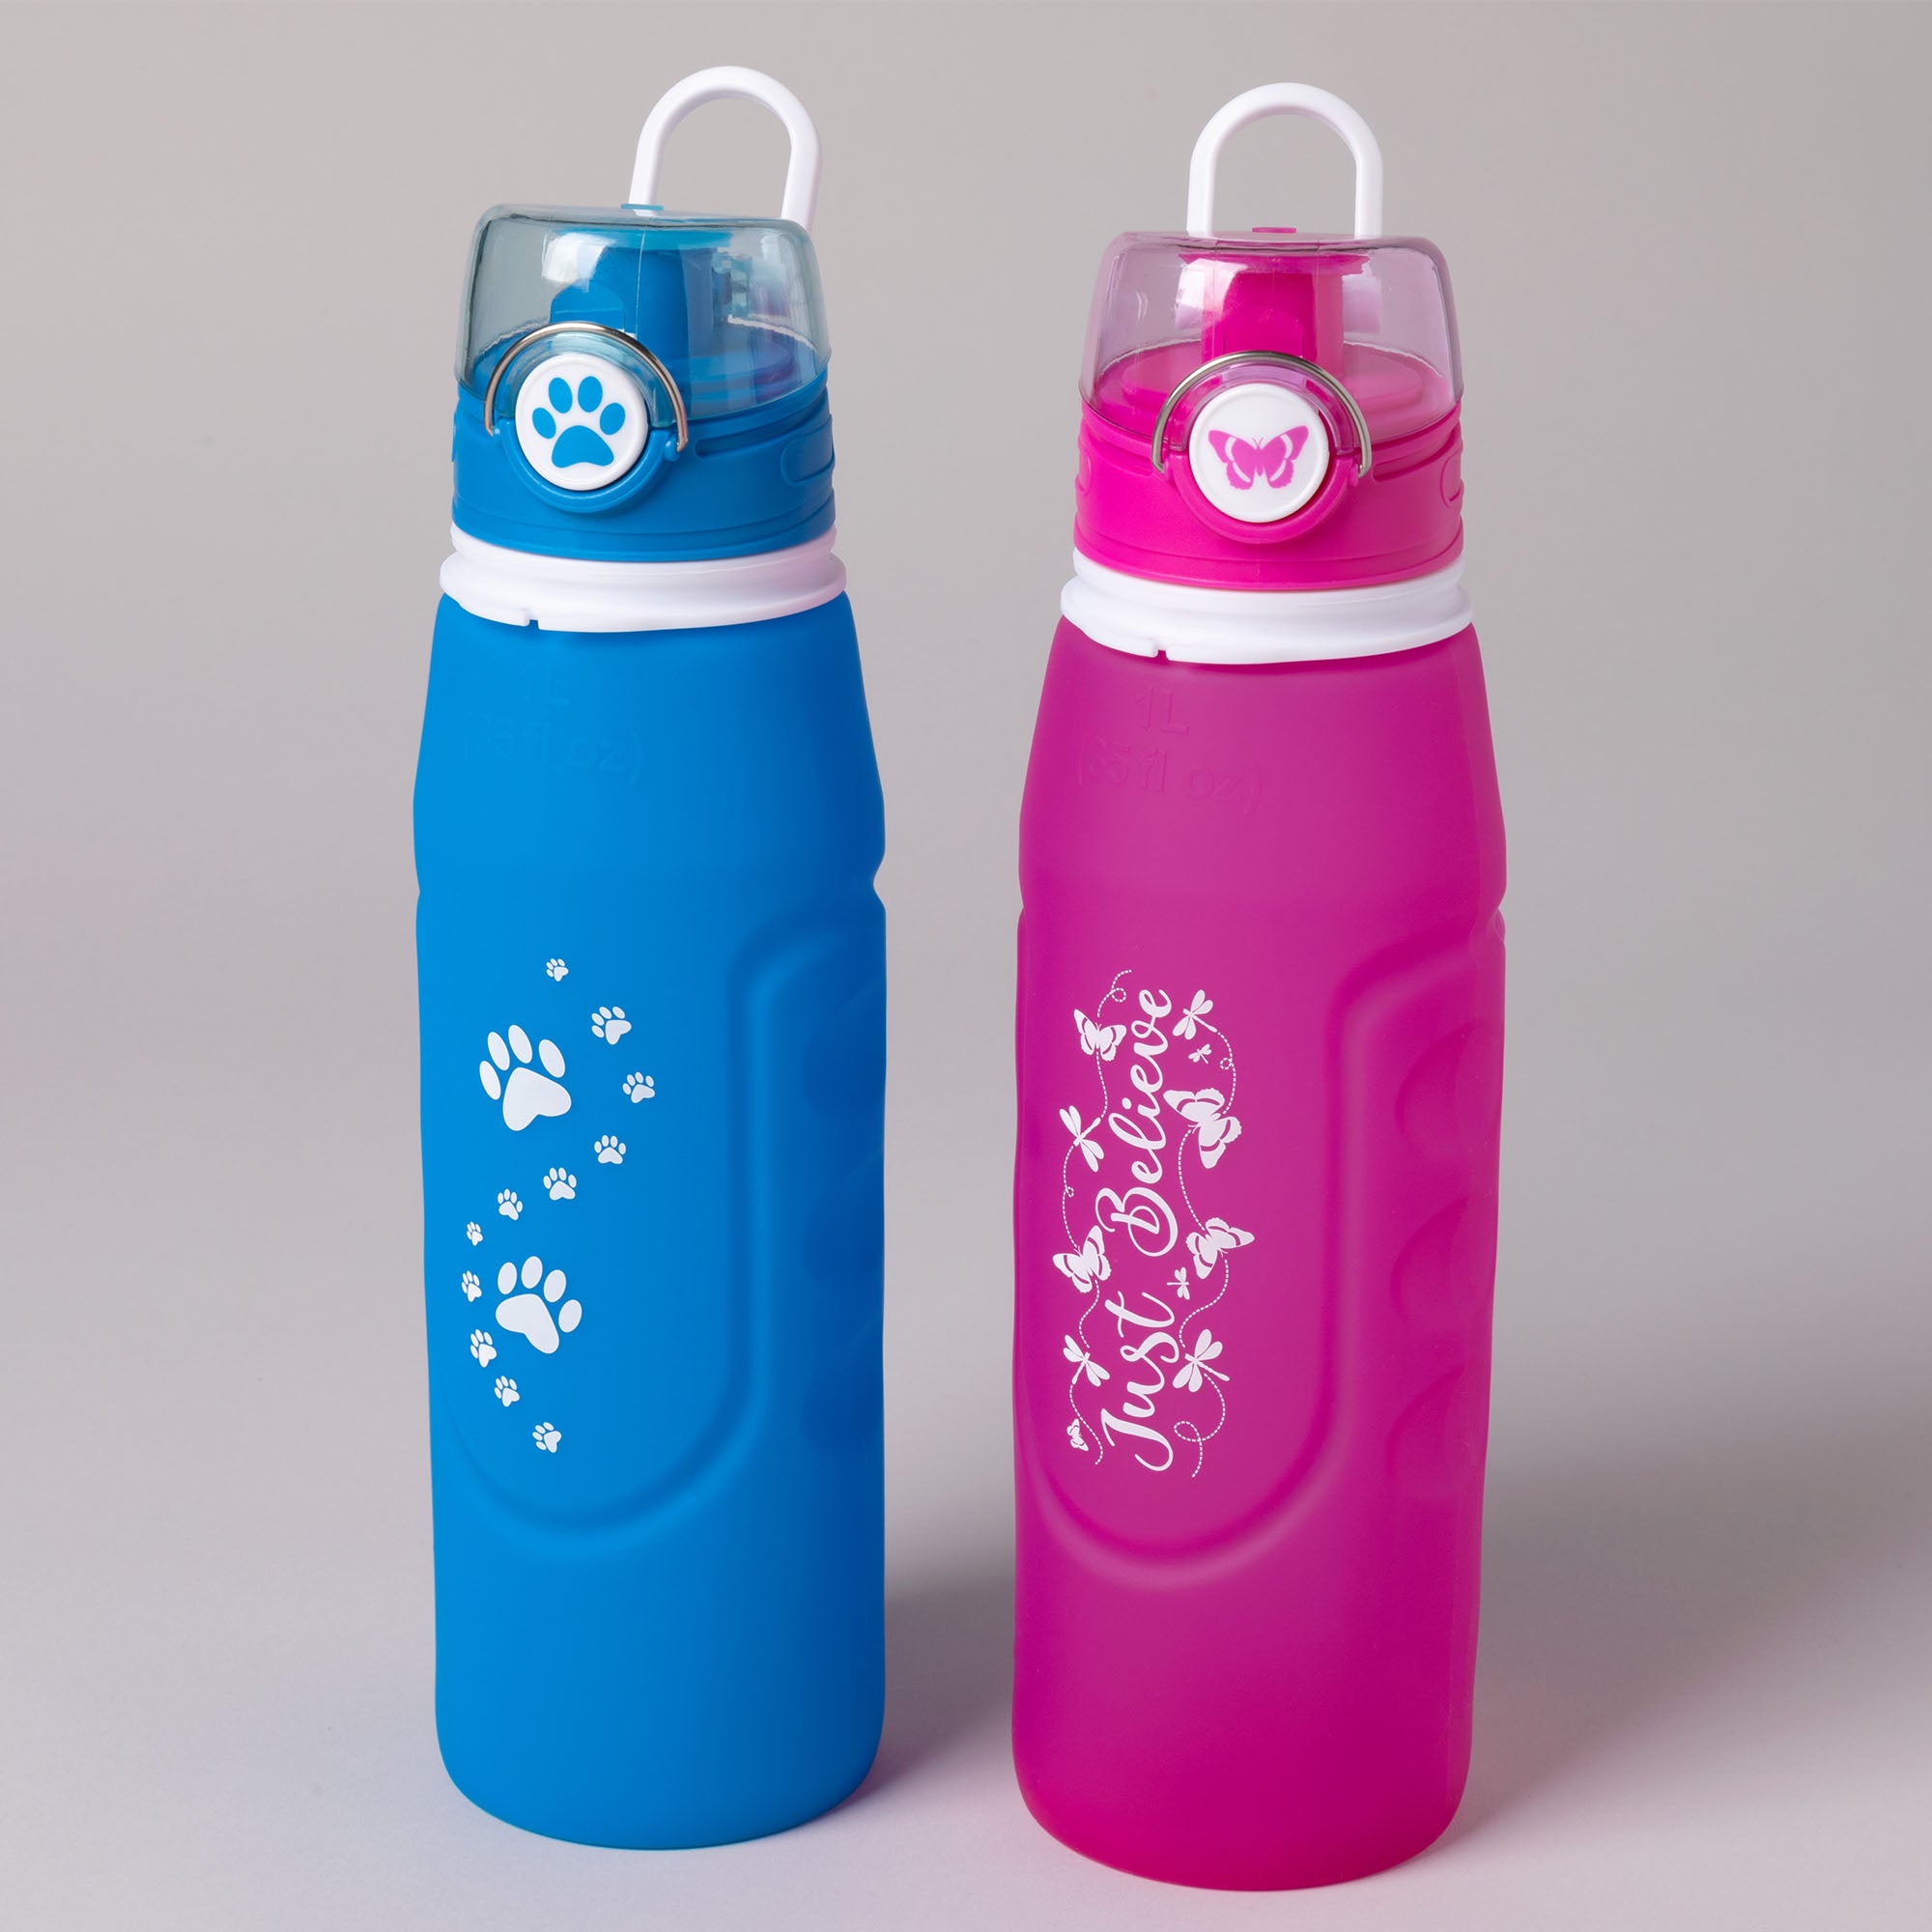 HydroGood Collapsible Silicone Water Bottle - Pink Fluttering Butterflies